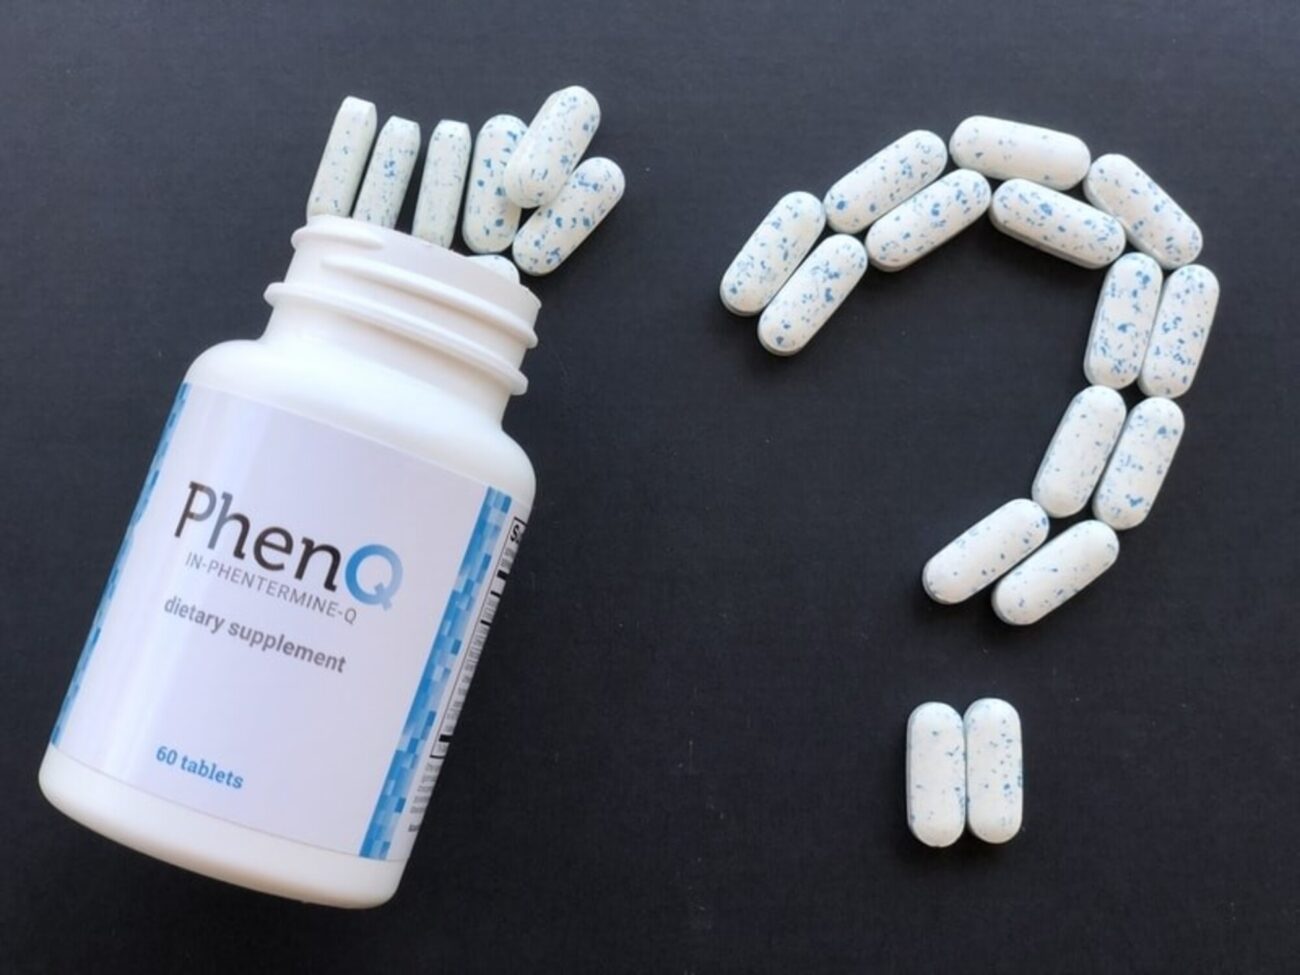 Are you looking for the ultimate weight loss supplement? Ever tried PhenQ? Check out the product's incredible health benefits right here.